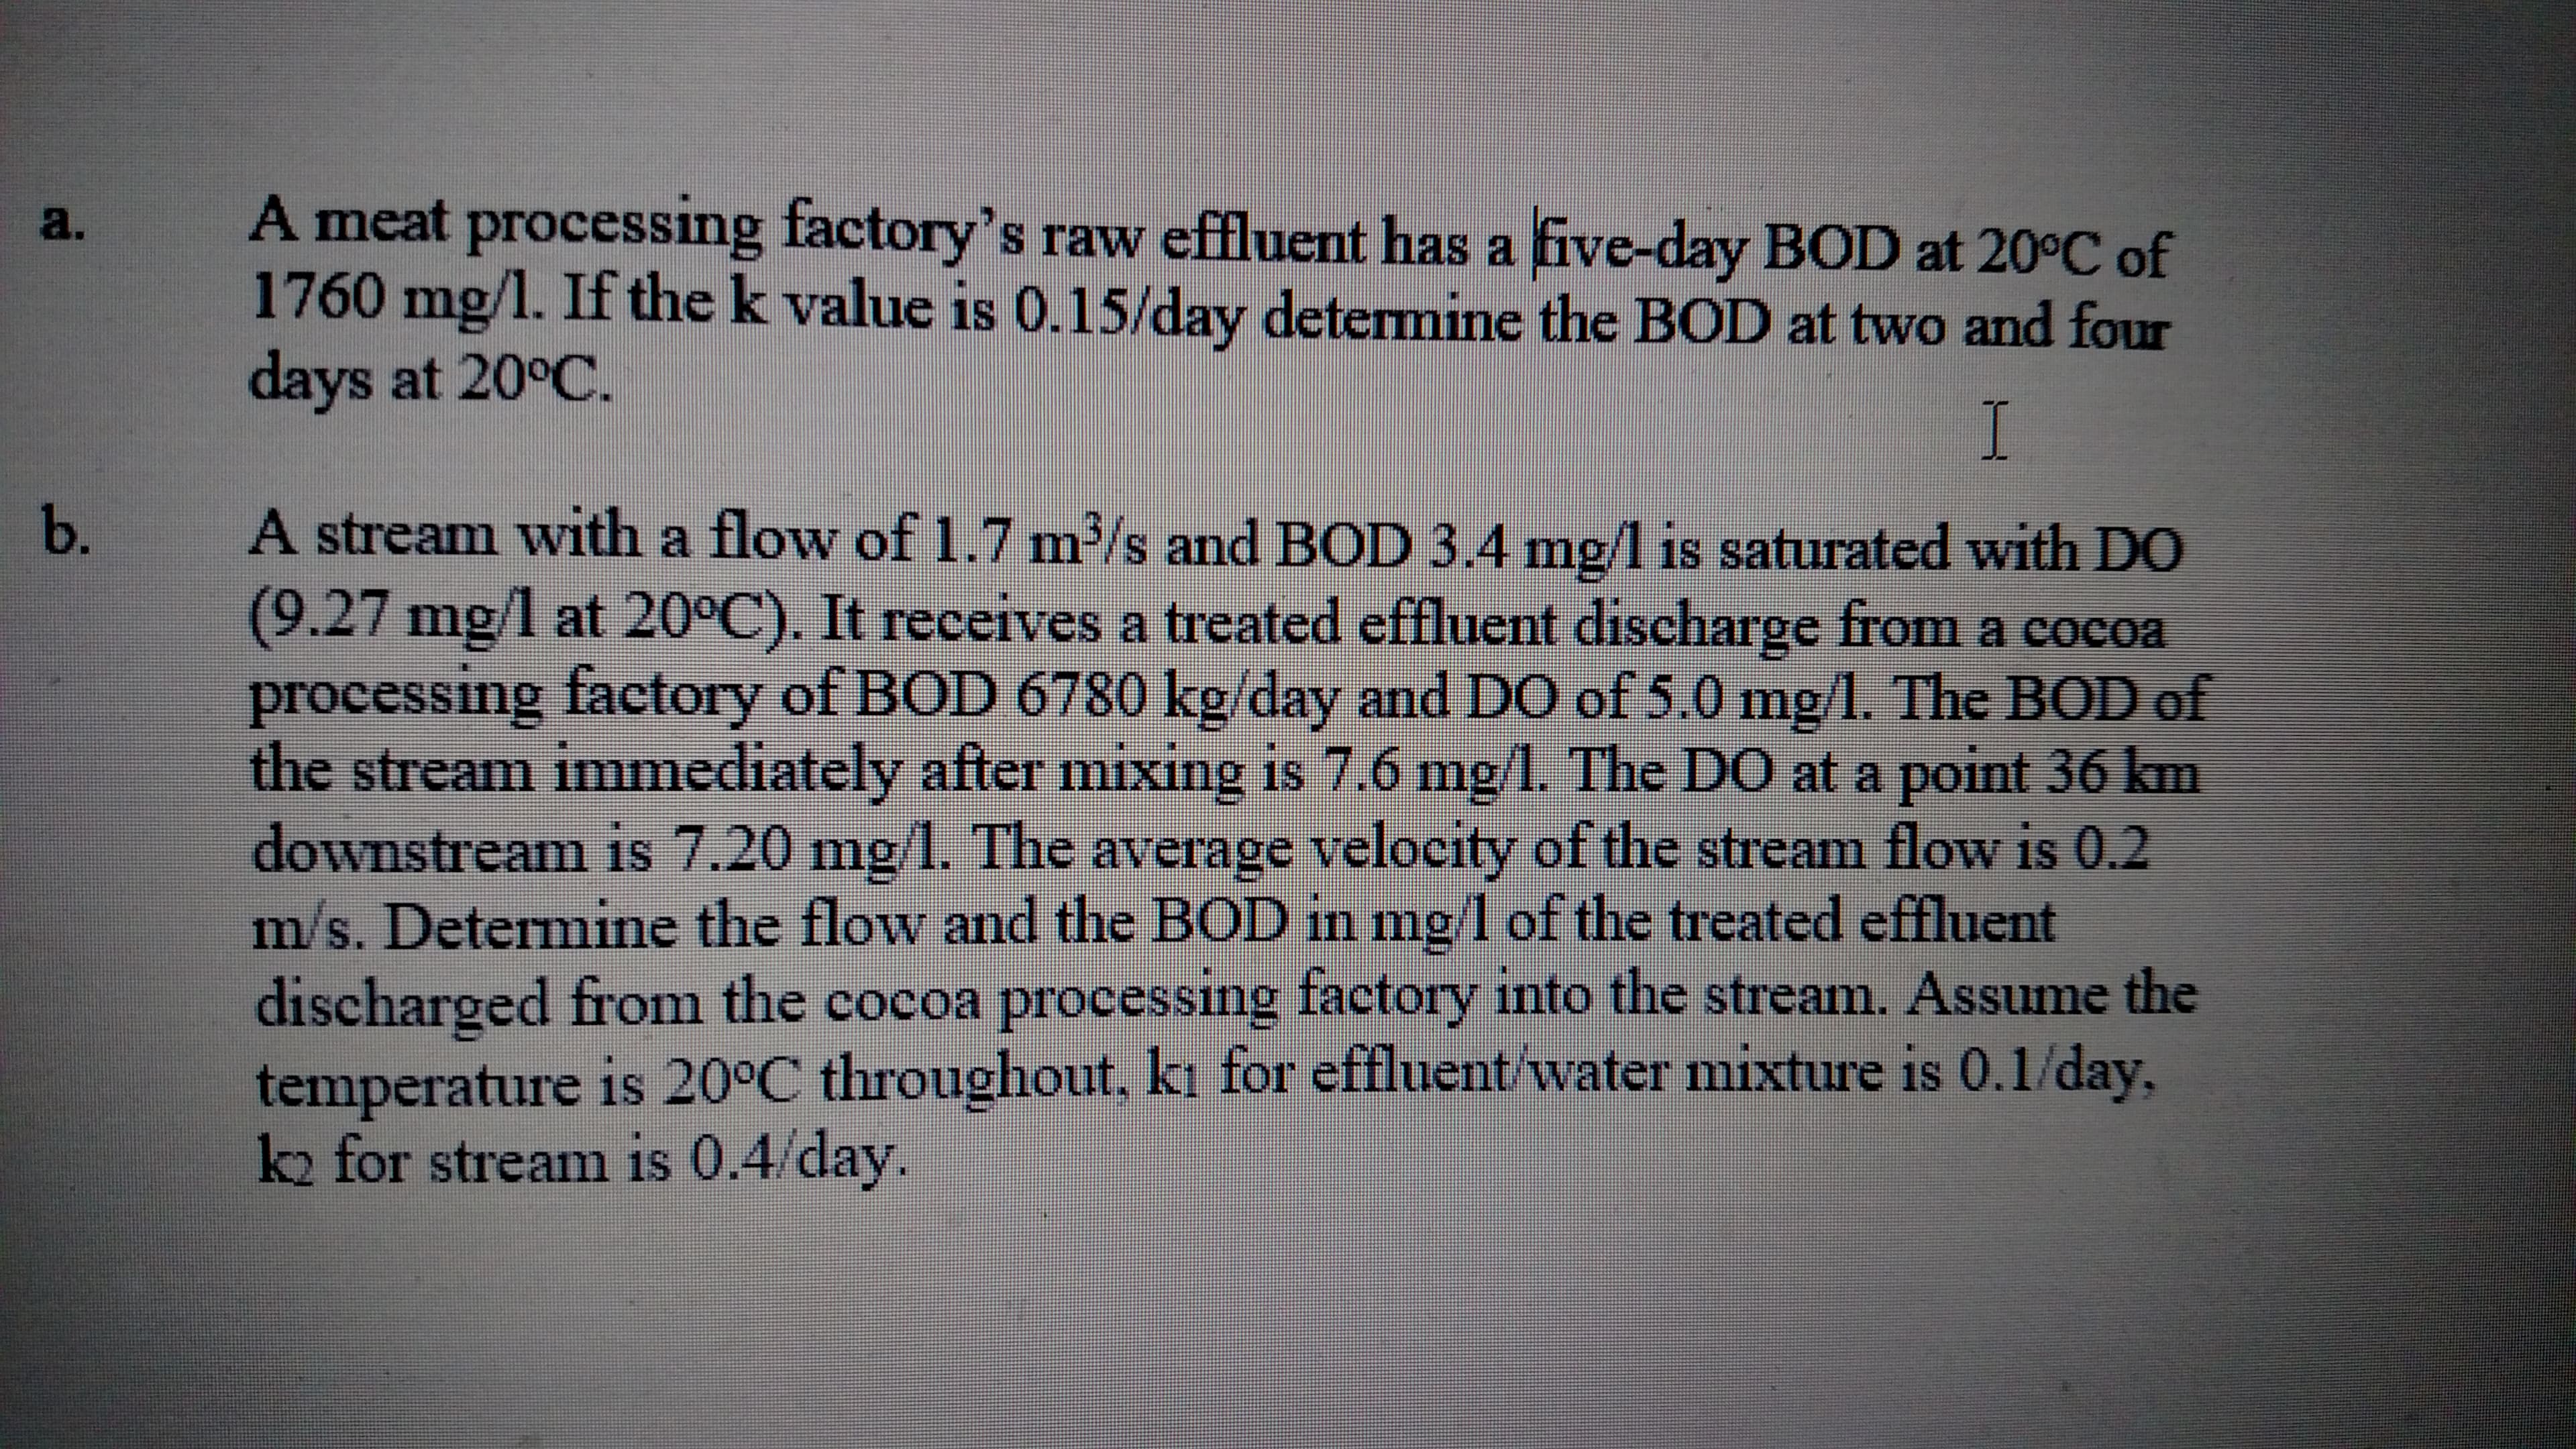 A meat processing factory's raw effluent has a five-day BOD at 20°C of
1760 mg/1. If the k value is 0.15/day detemine the BOD at two and four
days at 20°C.
